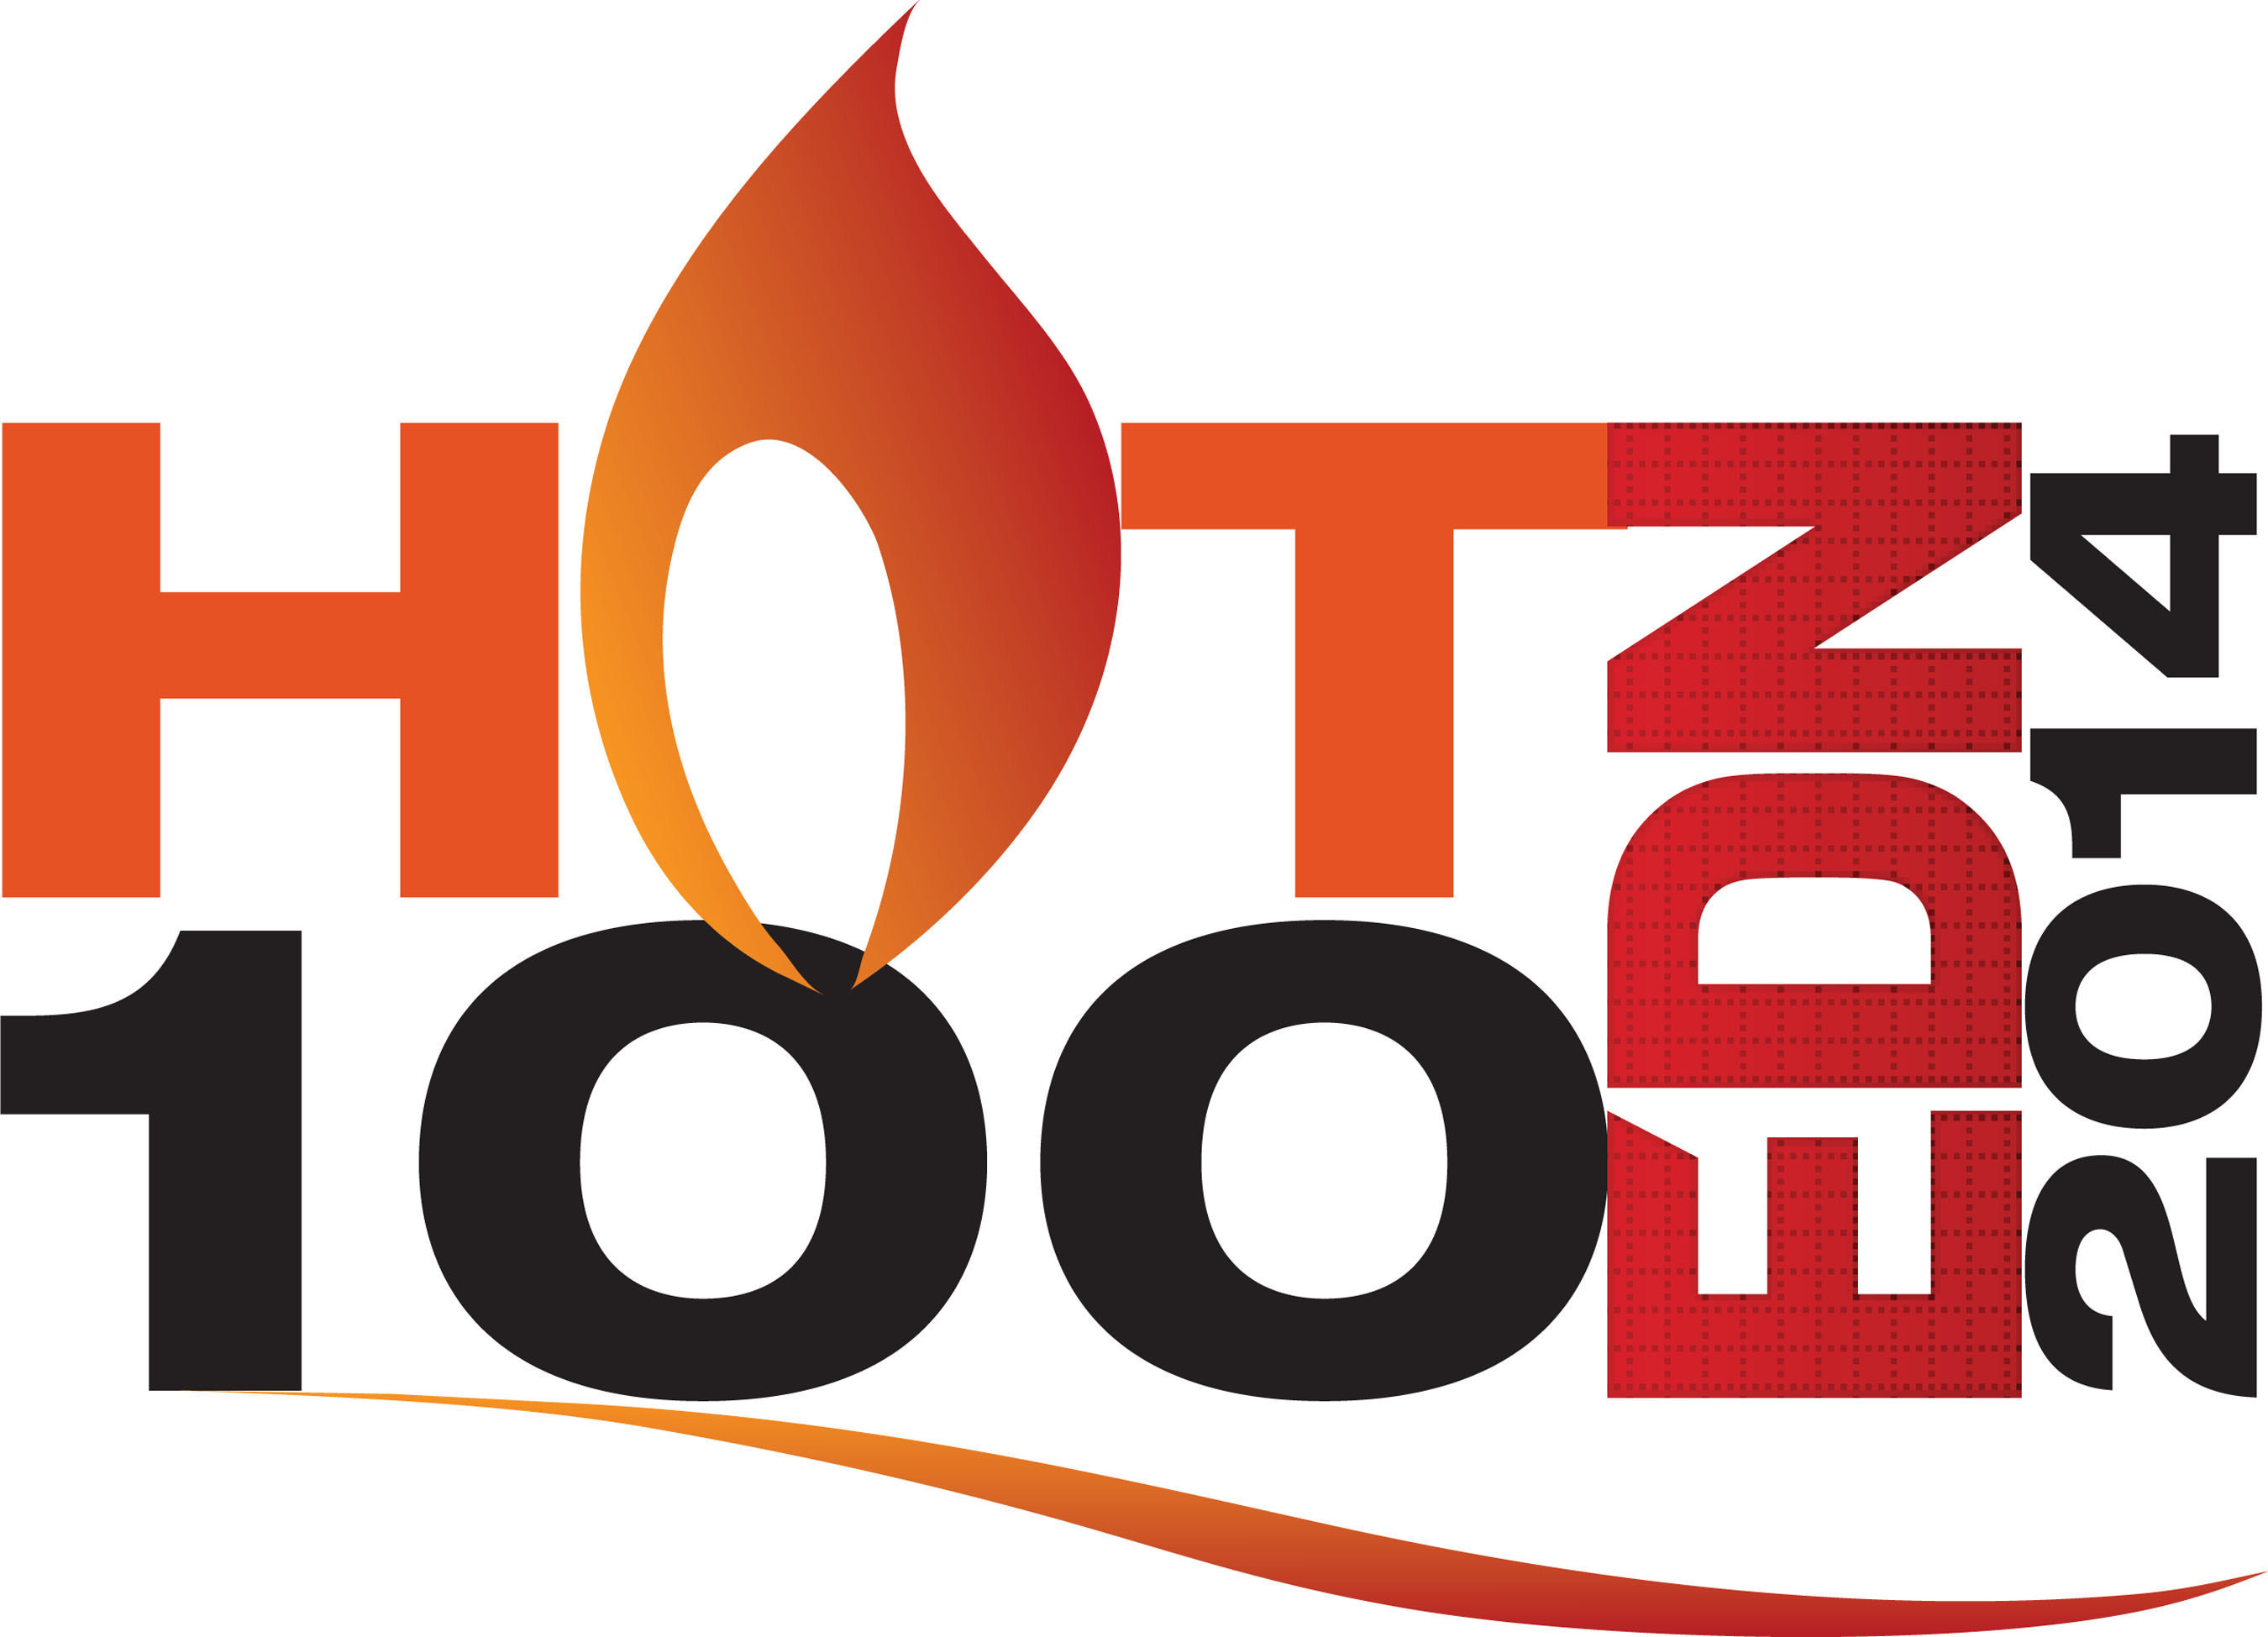 EDN named Intersil's ISL71590SEH radiation hardened temperature sensor as one of the Hot 100 Products of 2014. The 2014 EDN Hot 100 highlights the electronics industry's most significant products of the year based on innovation, significance, usefulness, and popularity.